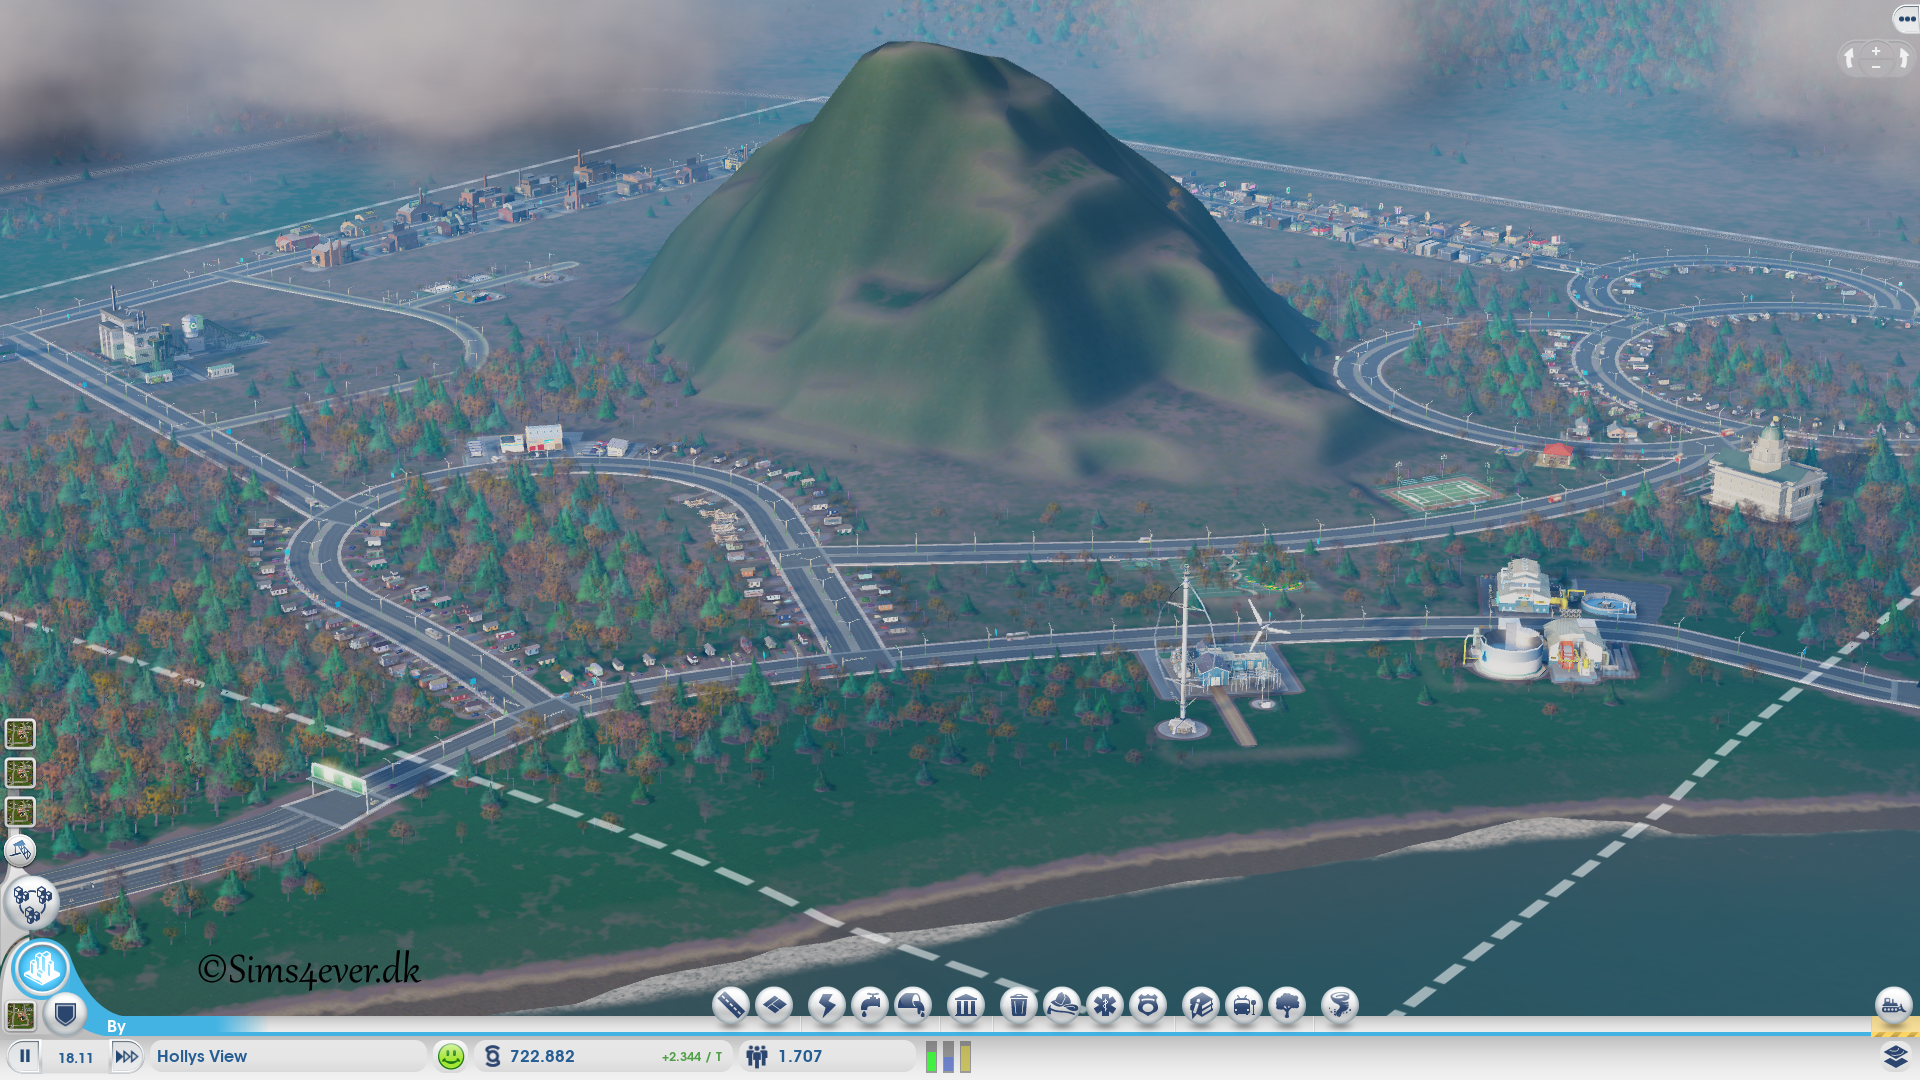 Hollys View (simcity)